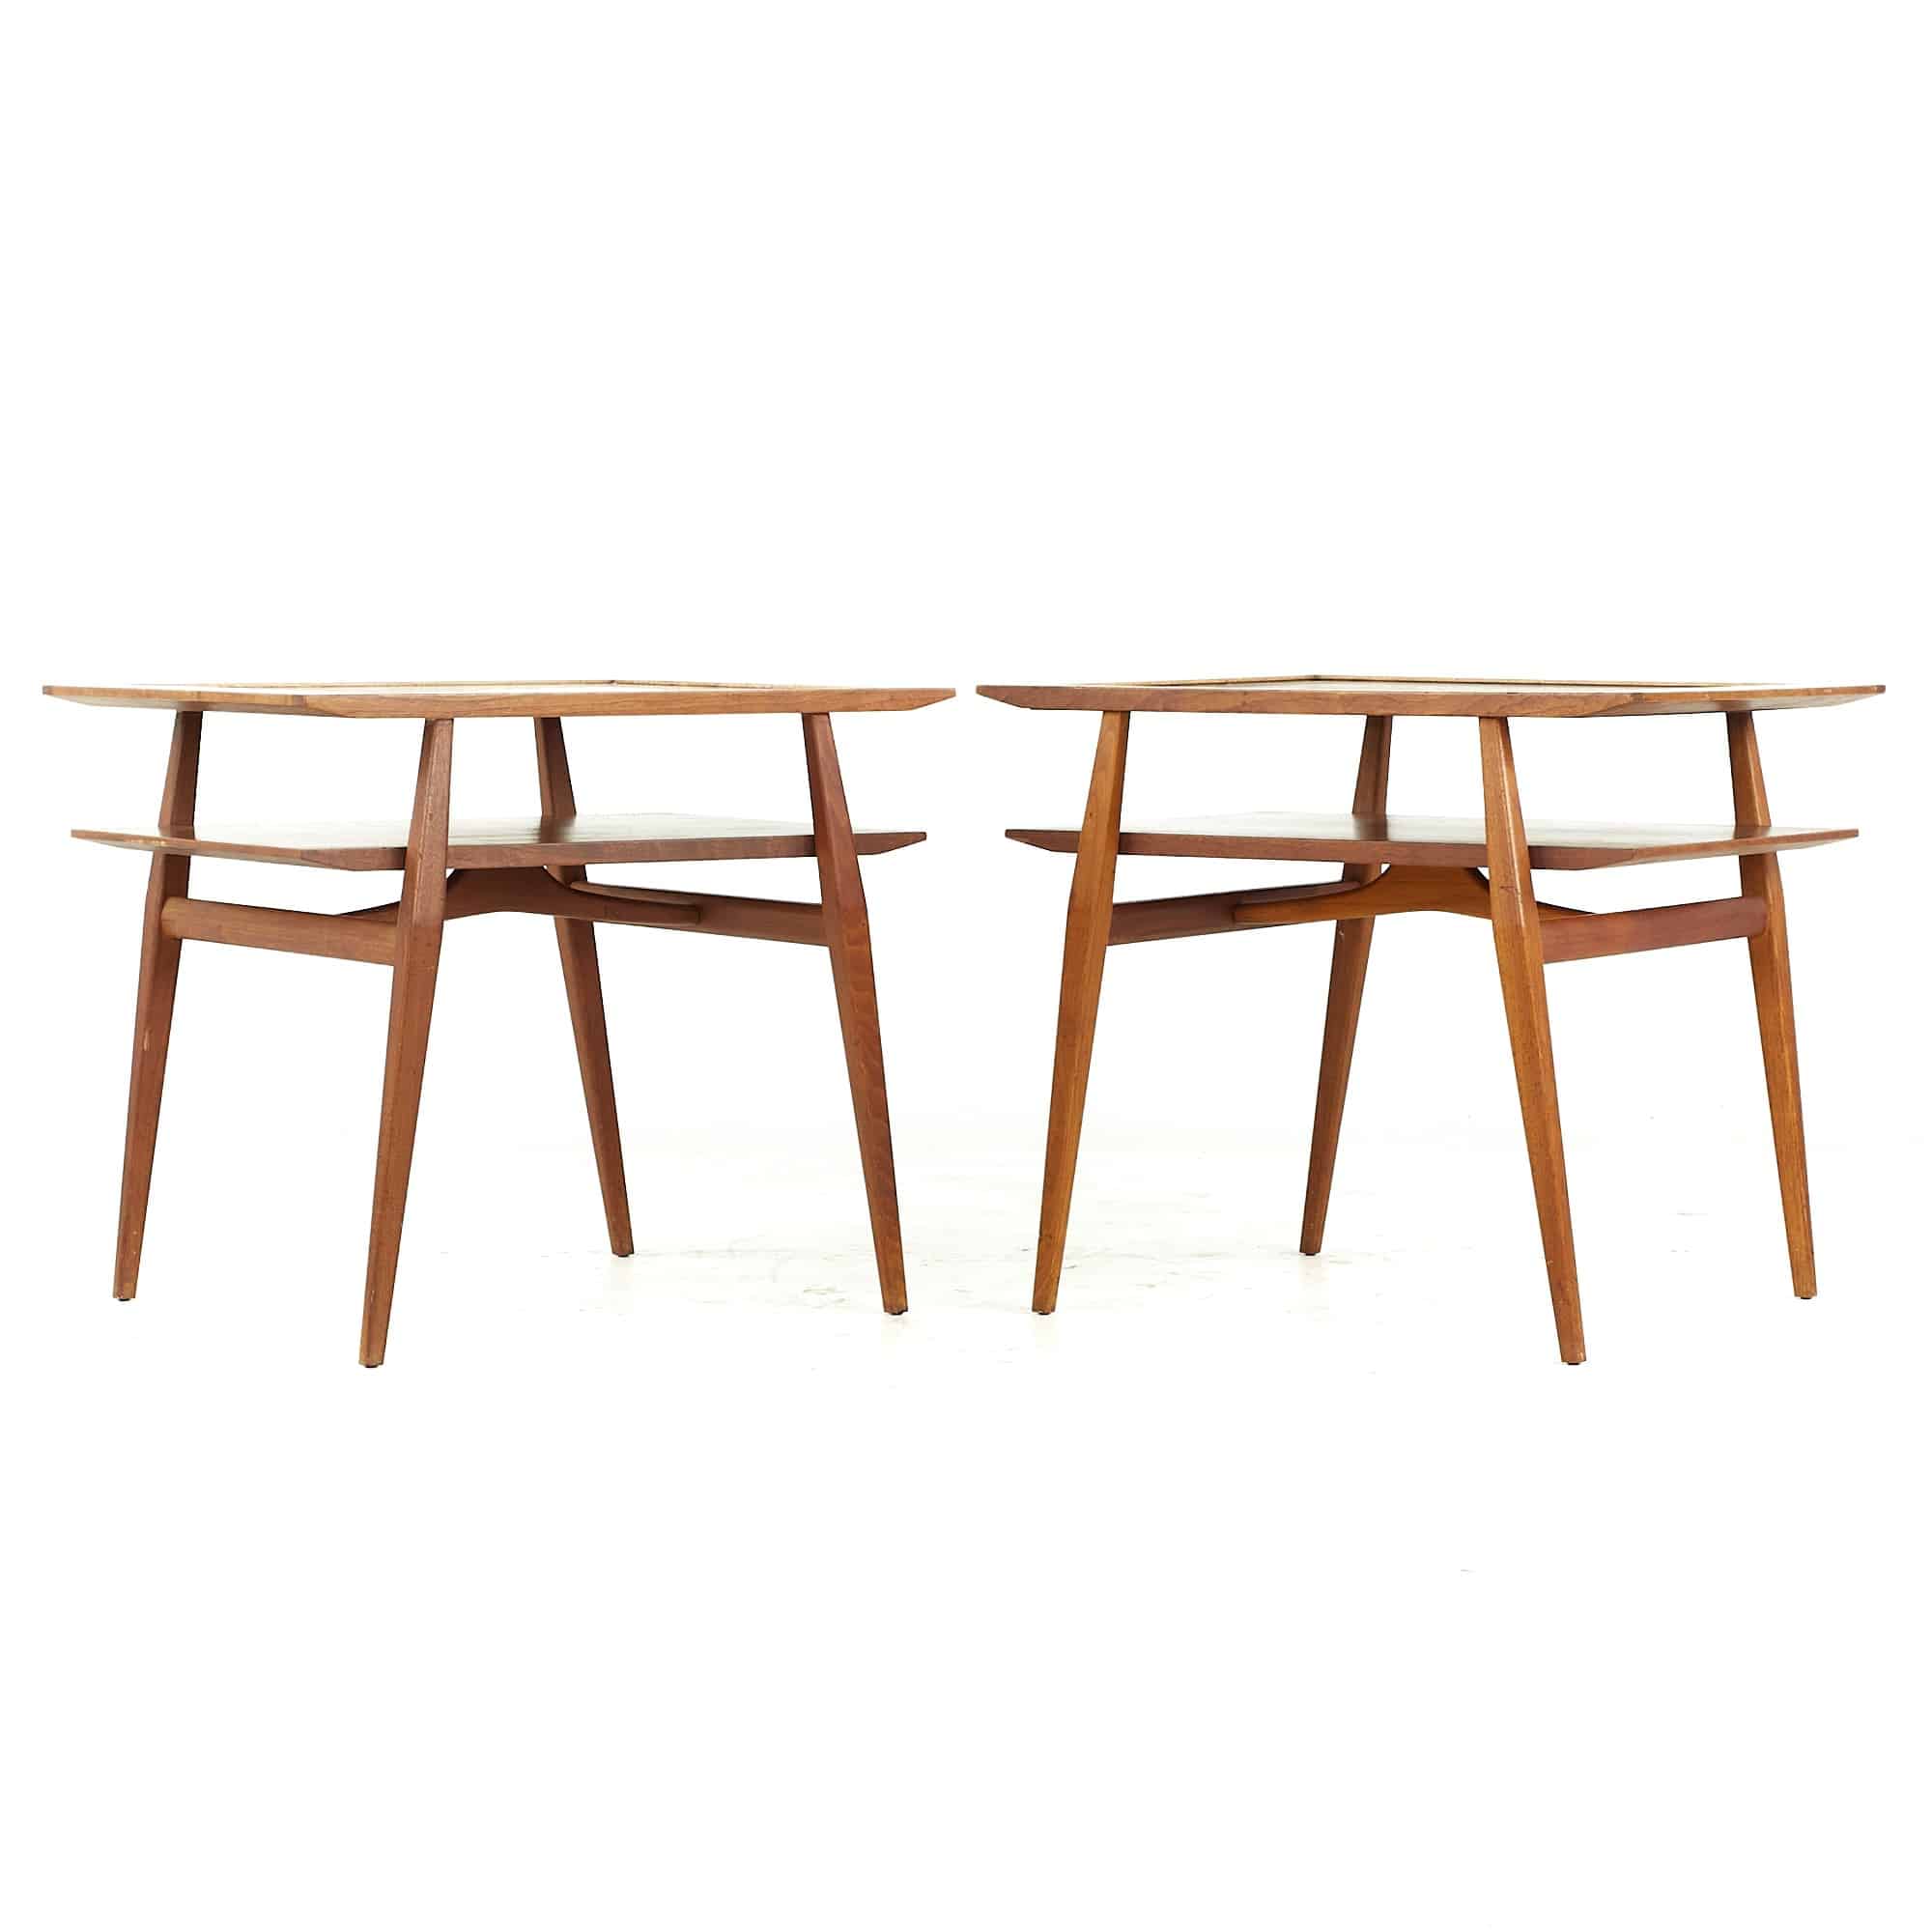 Bertha Schaefer for Singer & Sons American Mid-century Two-tier Walnut and Laminate Side End Tables - Pair